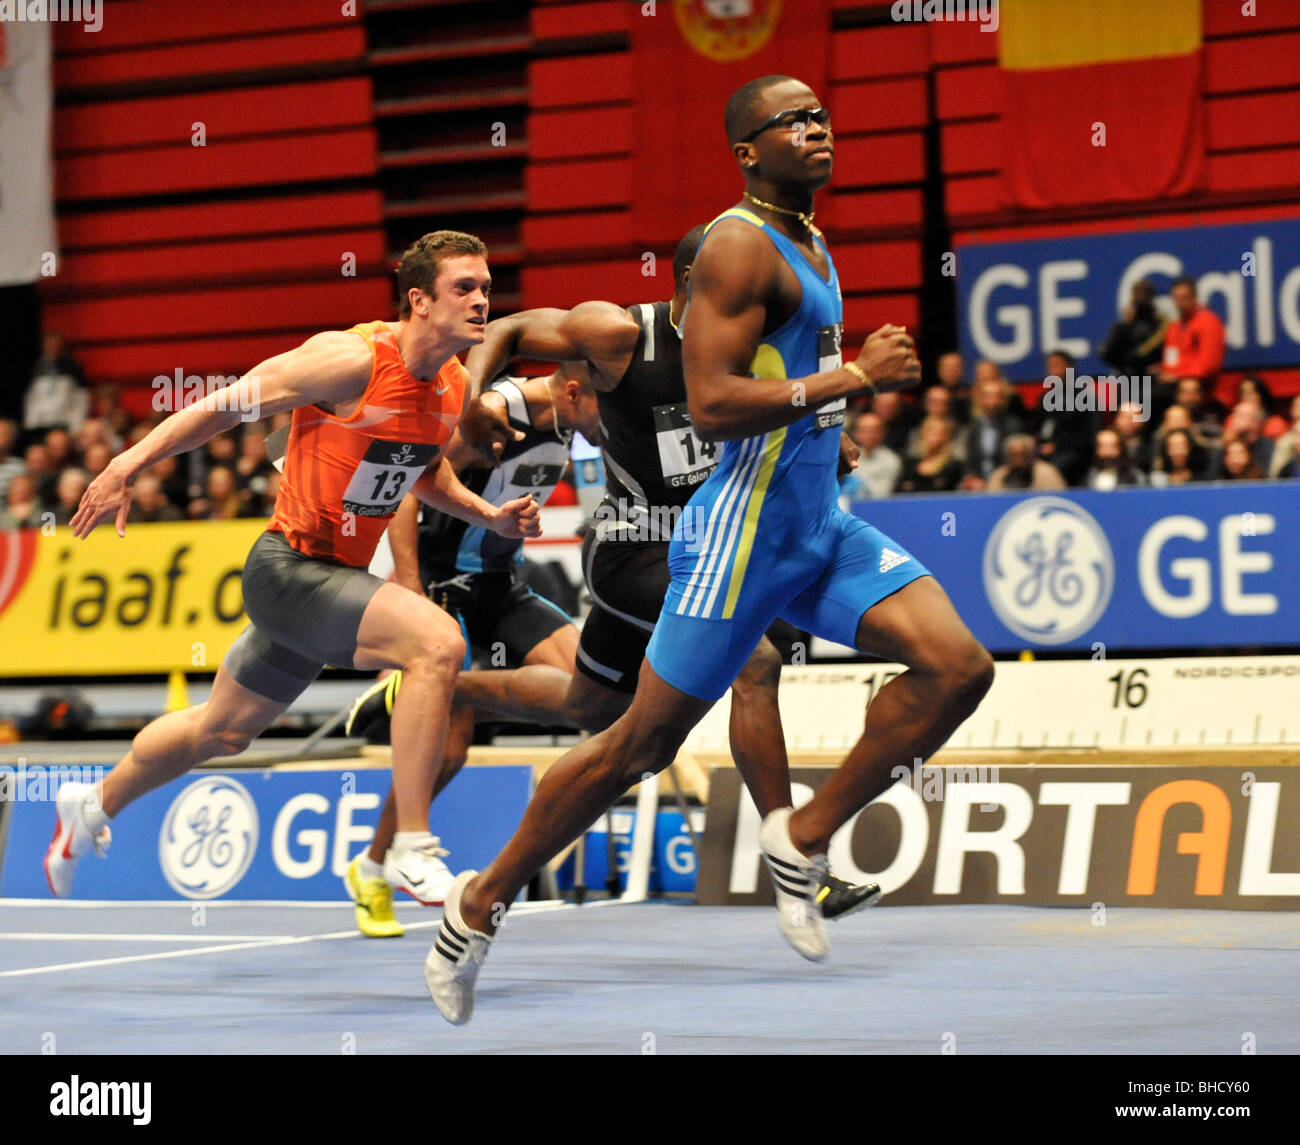 Dayron Robles Cuba wins the 60 meter hurdles event in the GE Games in the Ericsson Globe Arena Stock Photo